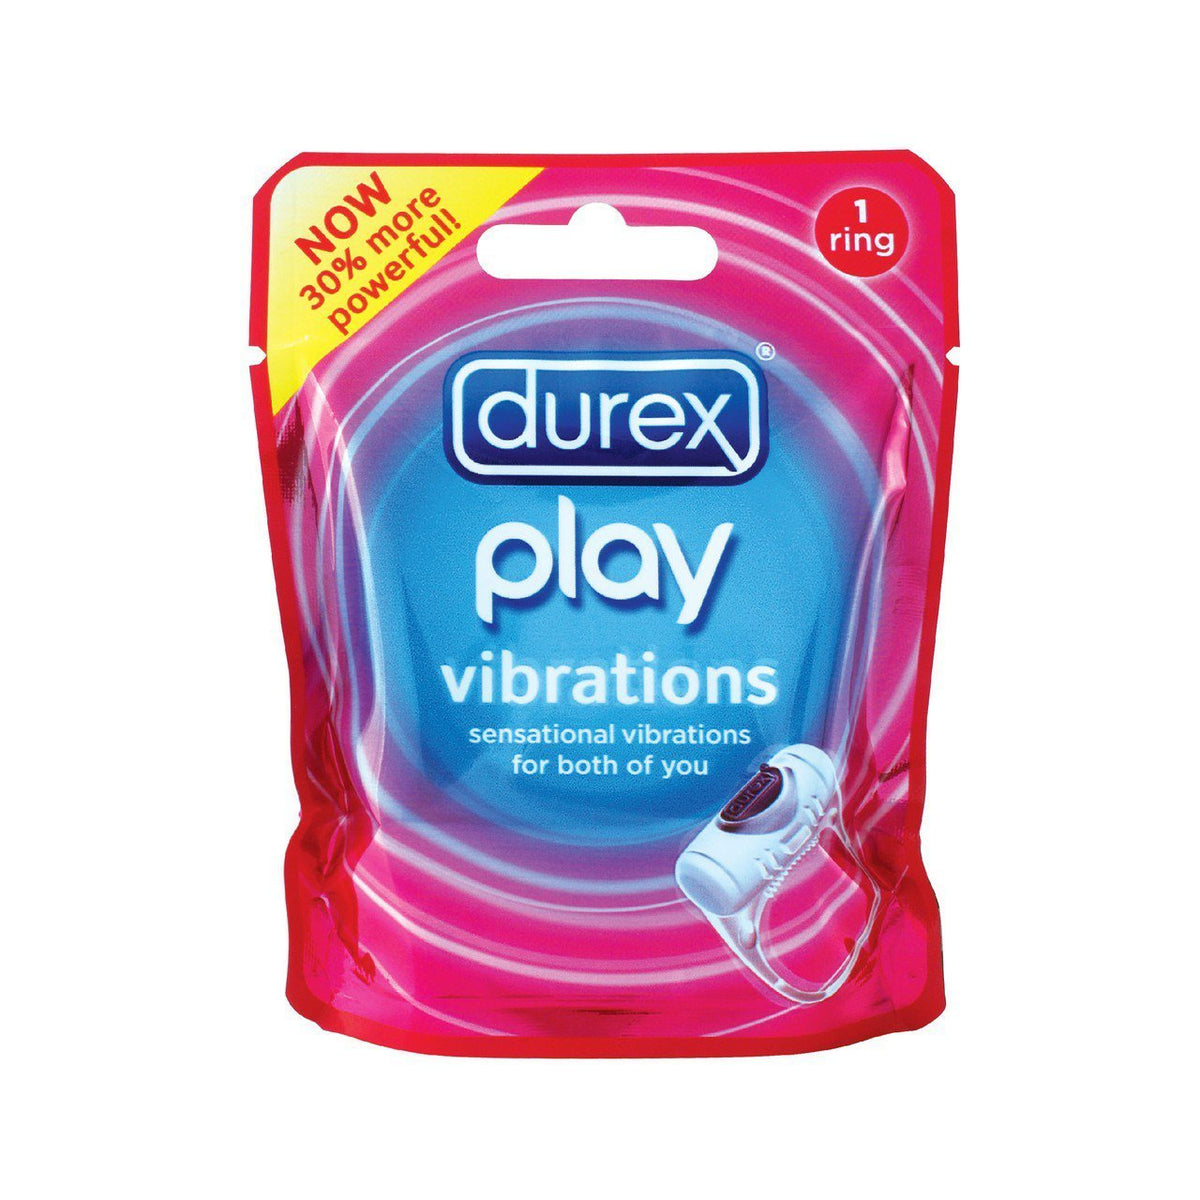 Durex - Play Vibrations 1 Cock Ring (Clear) -  Rubber Cock Ring (Vibration) Non Rechargeable  Durio.sg